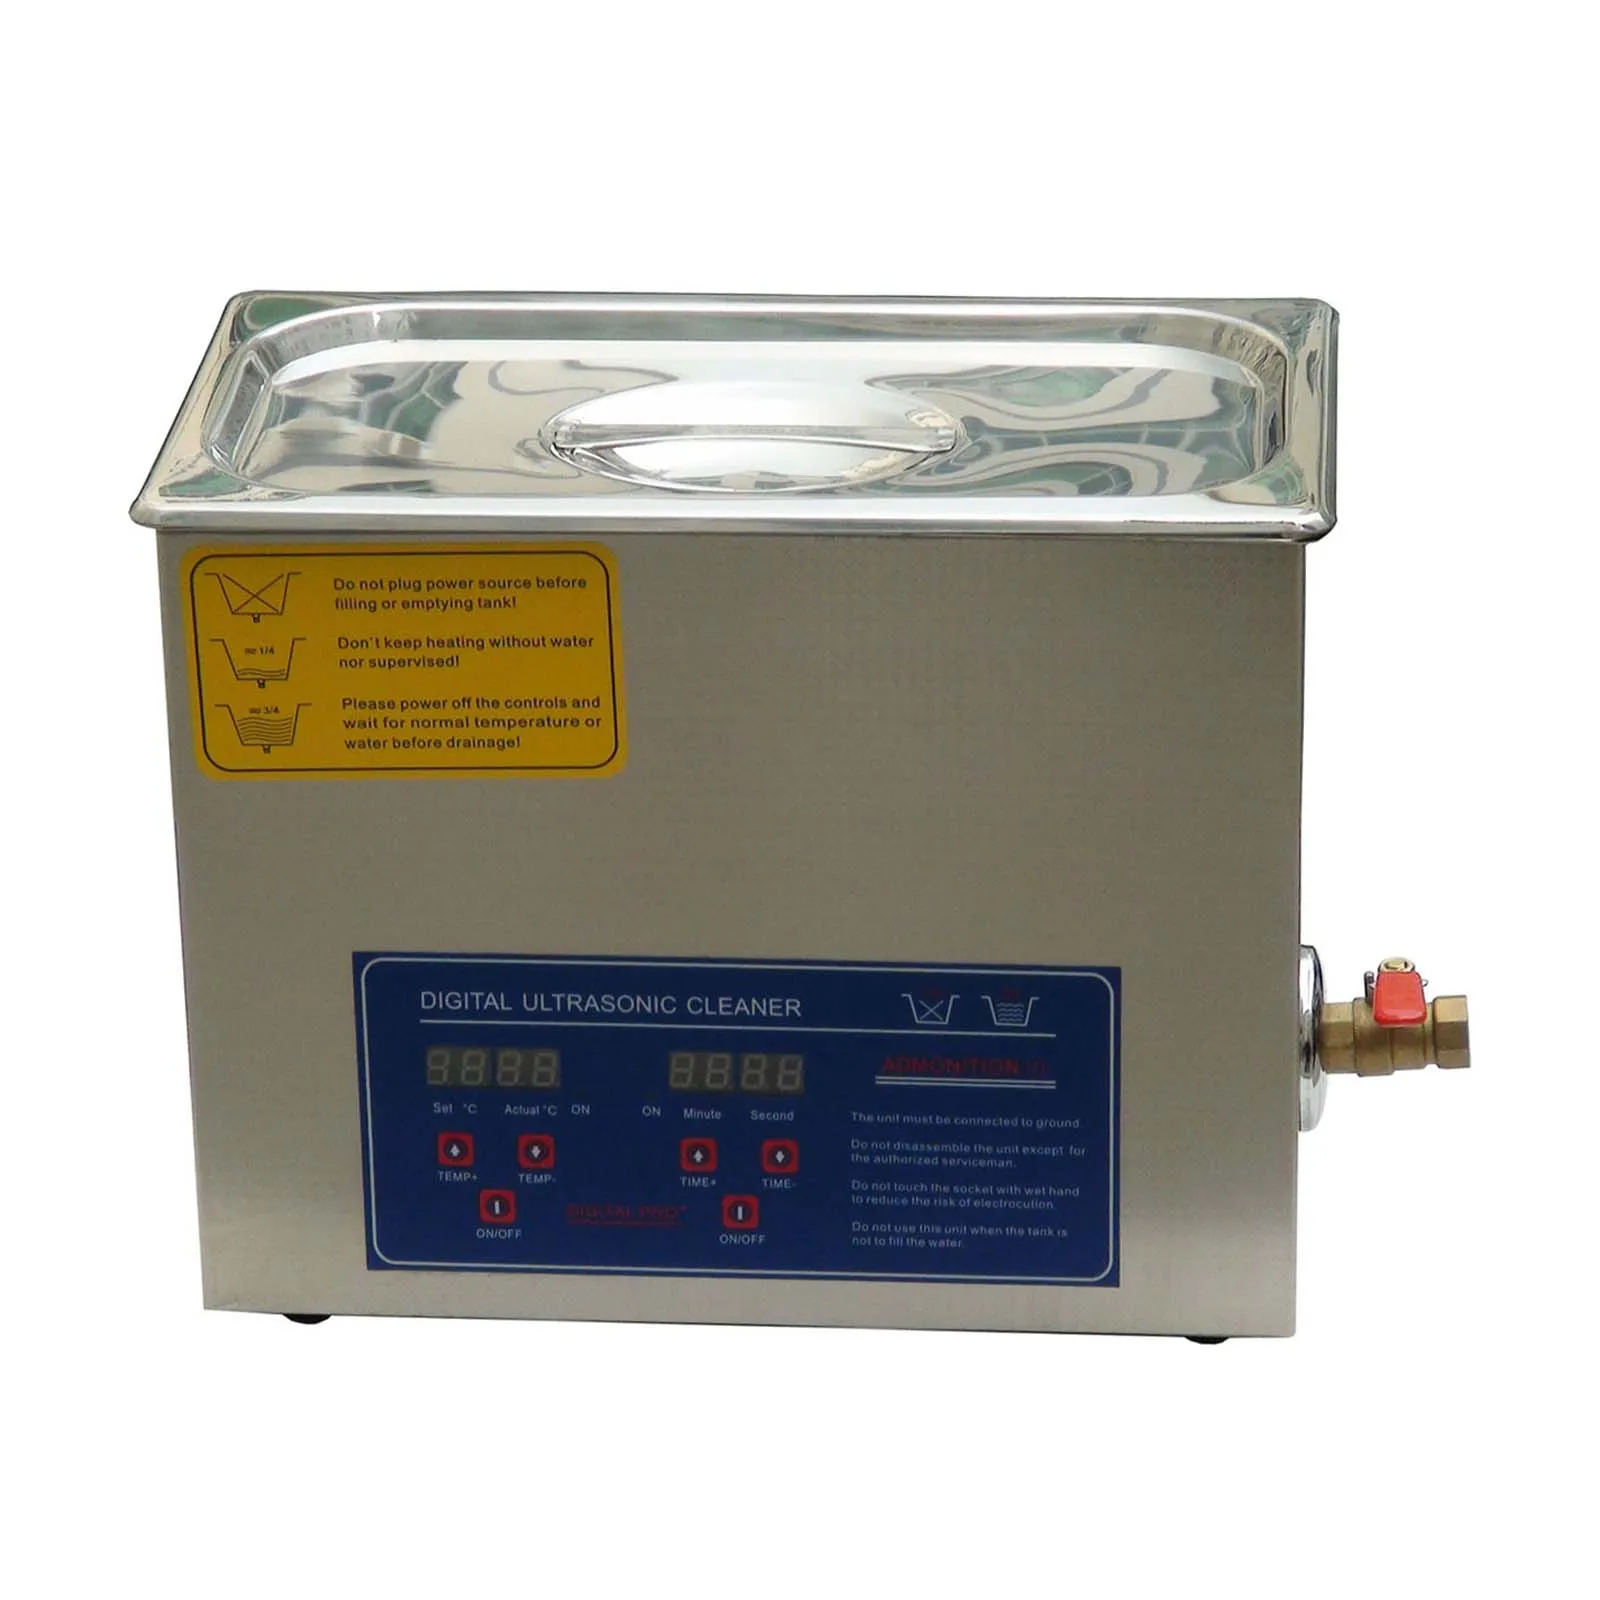 Mini Industrial Ultrasonic Cleaning Machine - Oil Removal, Rust and Scale Removal for Laboratory Hardware Components